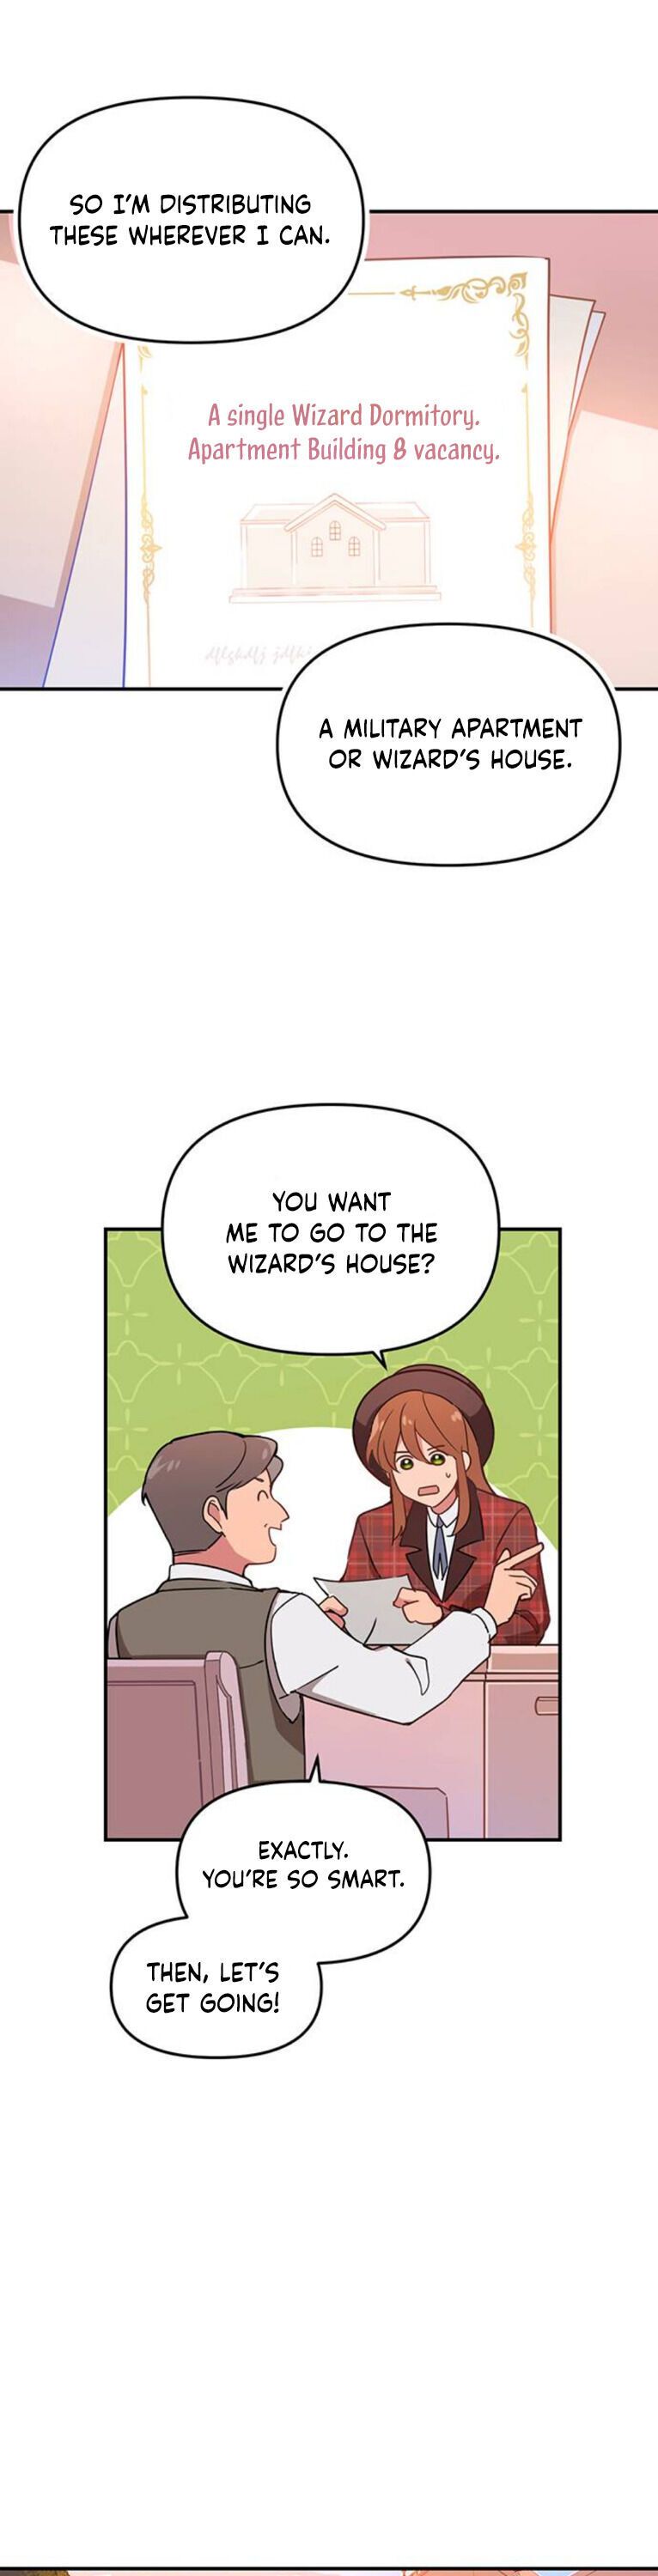 Single Wizard’s Dormitory Apartment Chapter 1 - Page 3